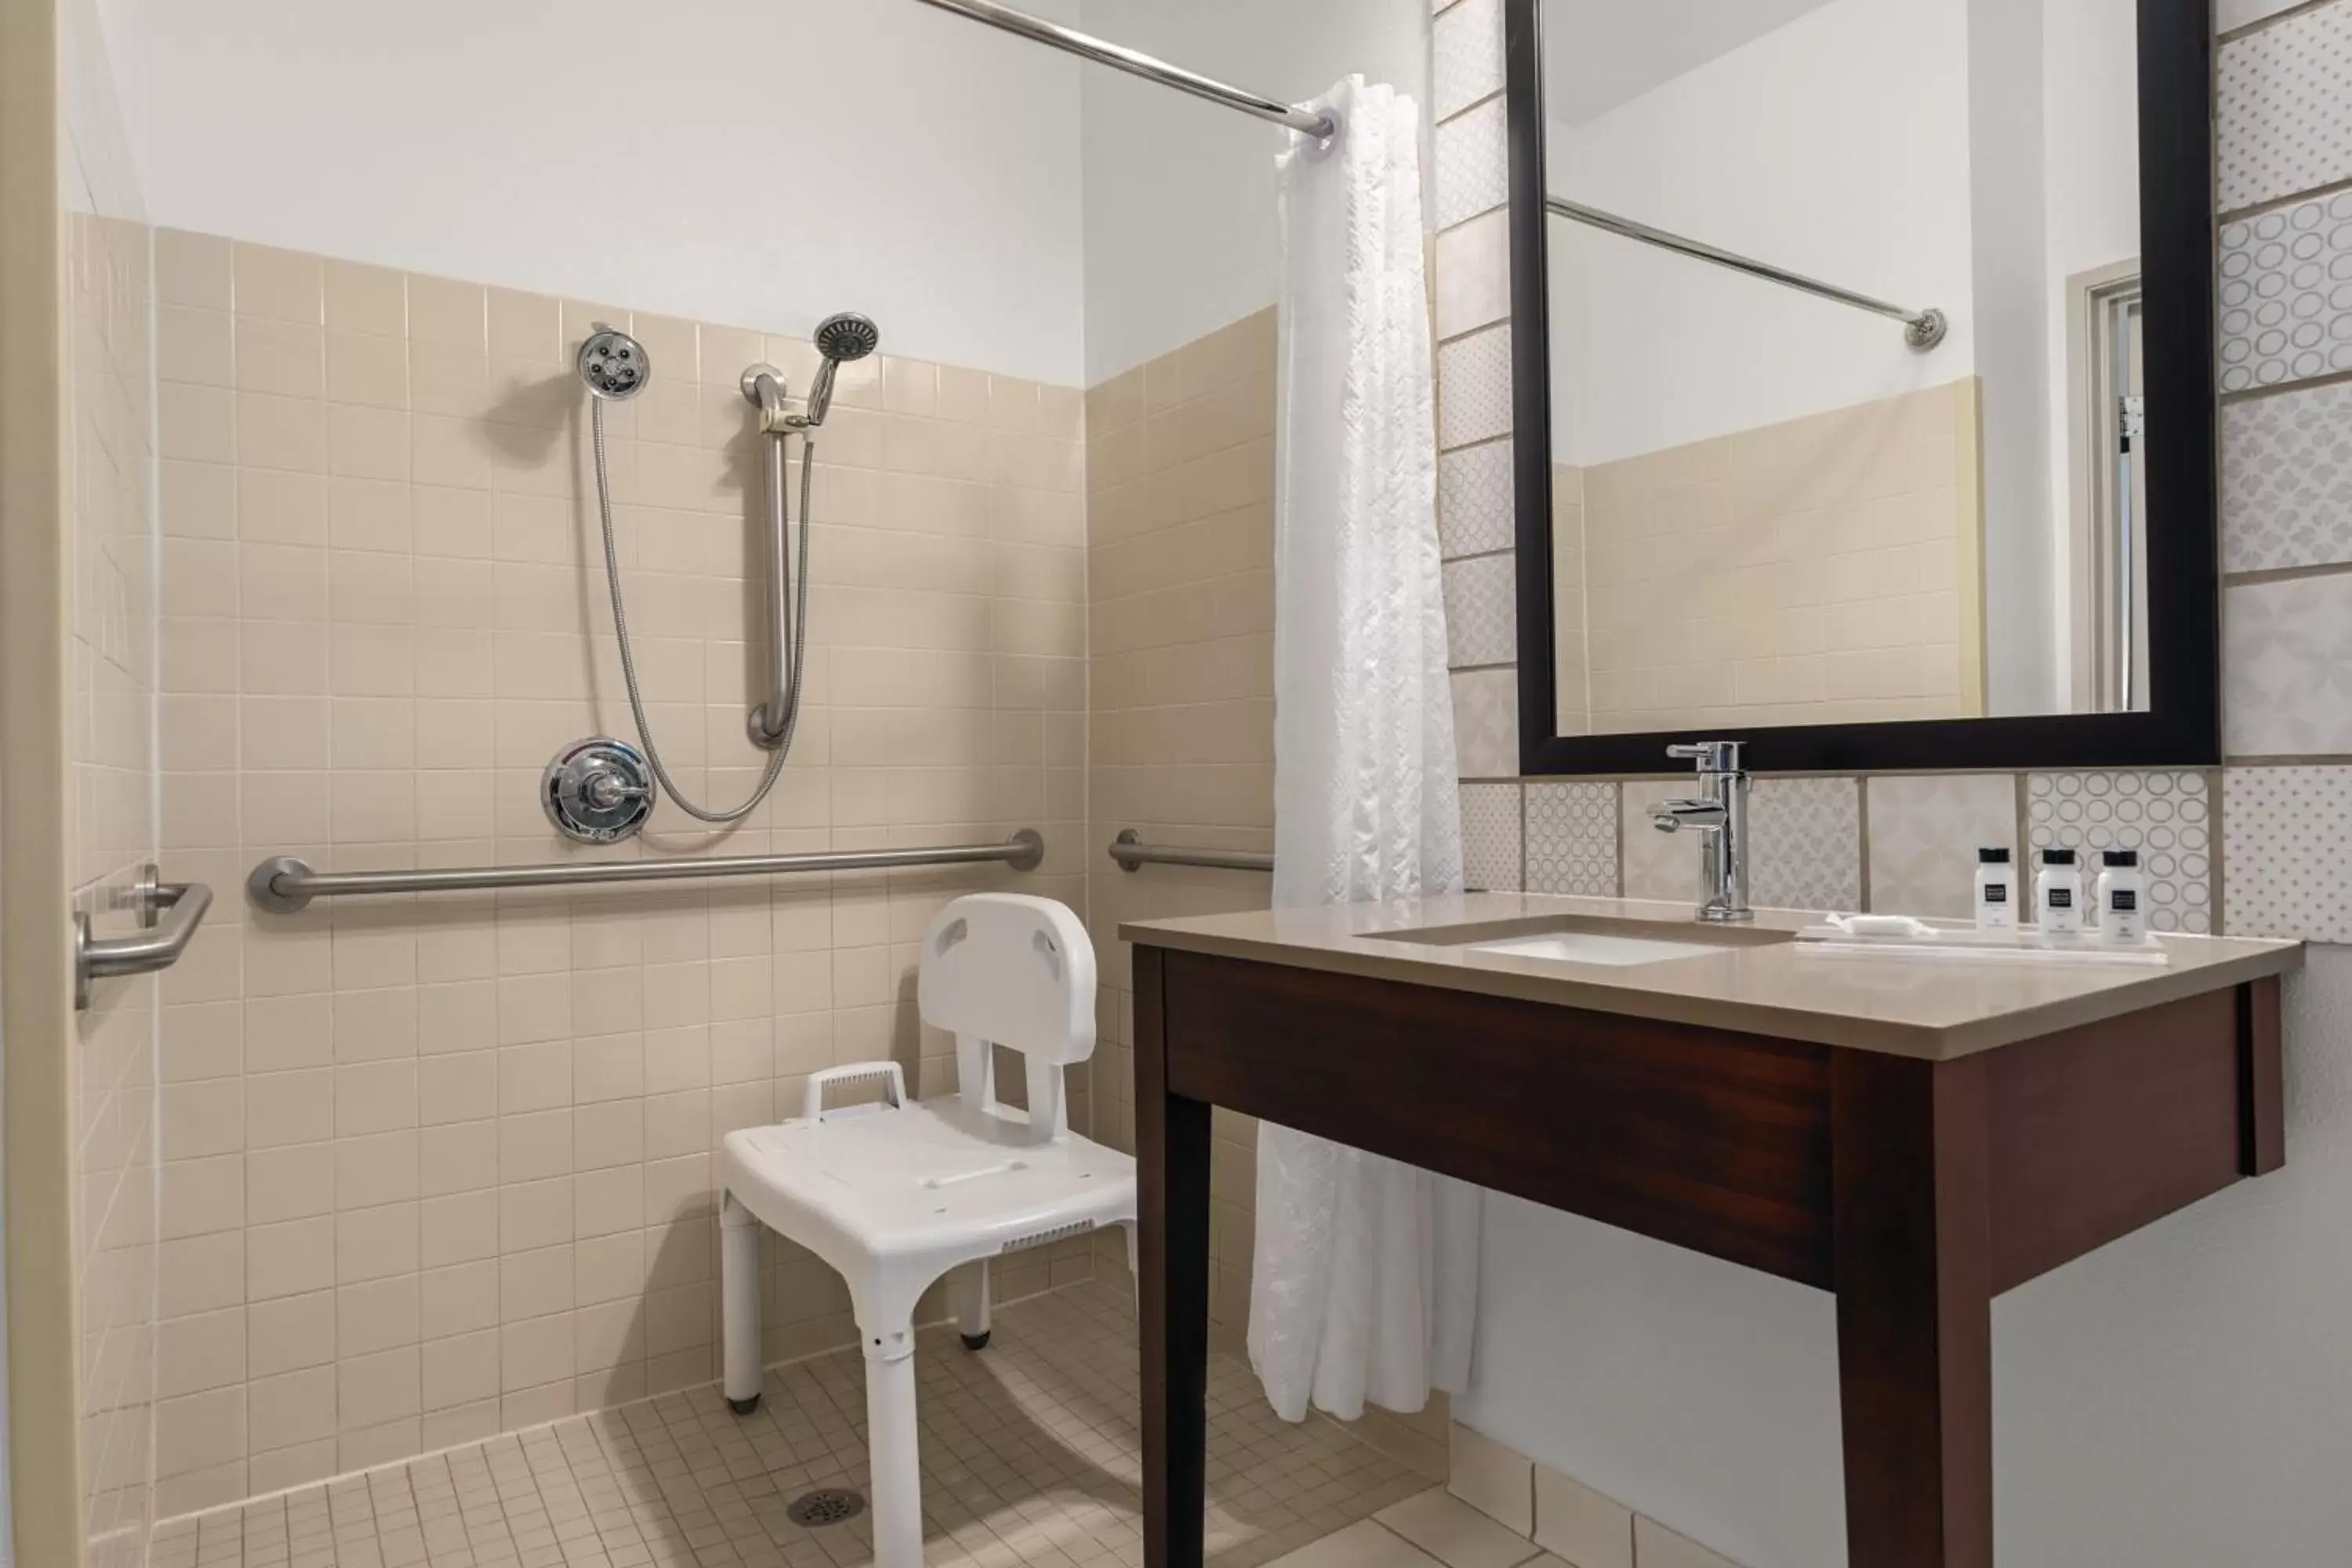 Bathroom in Country Inn & Suites by Radisson, Big Flats (Elmira), NY